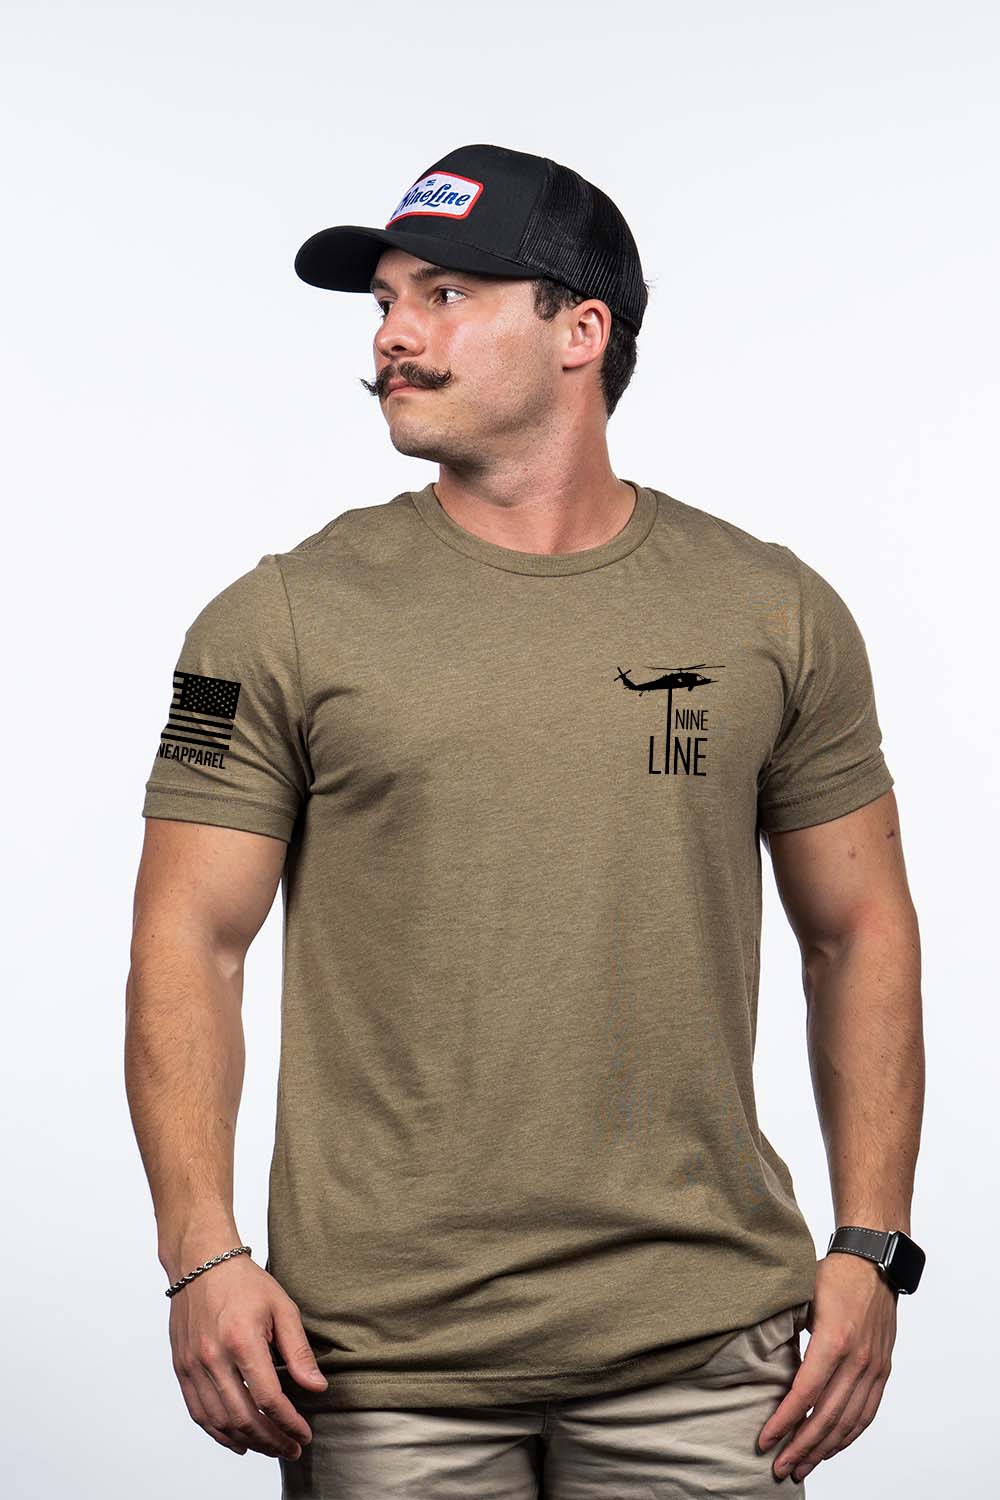 Premium Men's T-Shirt - LIFE, LIBERTY AND THE RIGHT TO BEAR ARMS